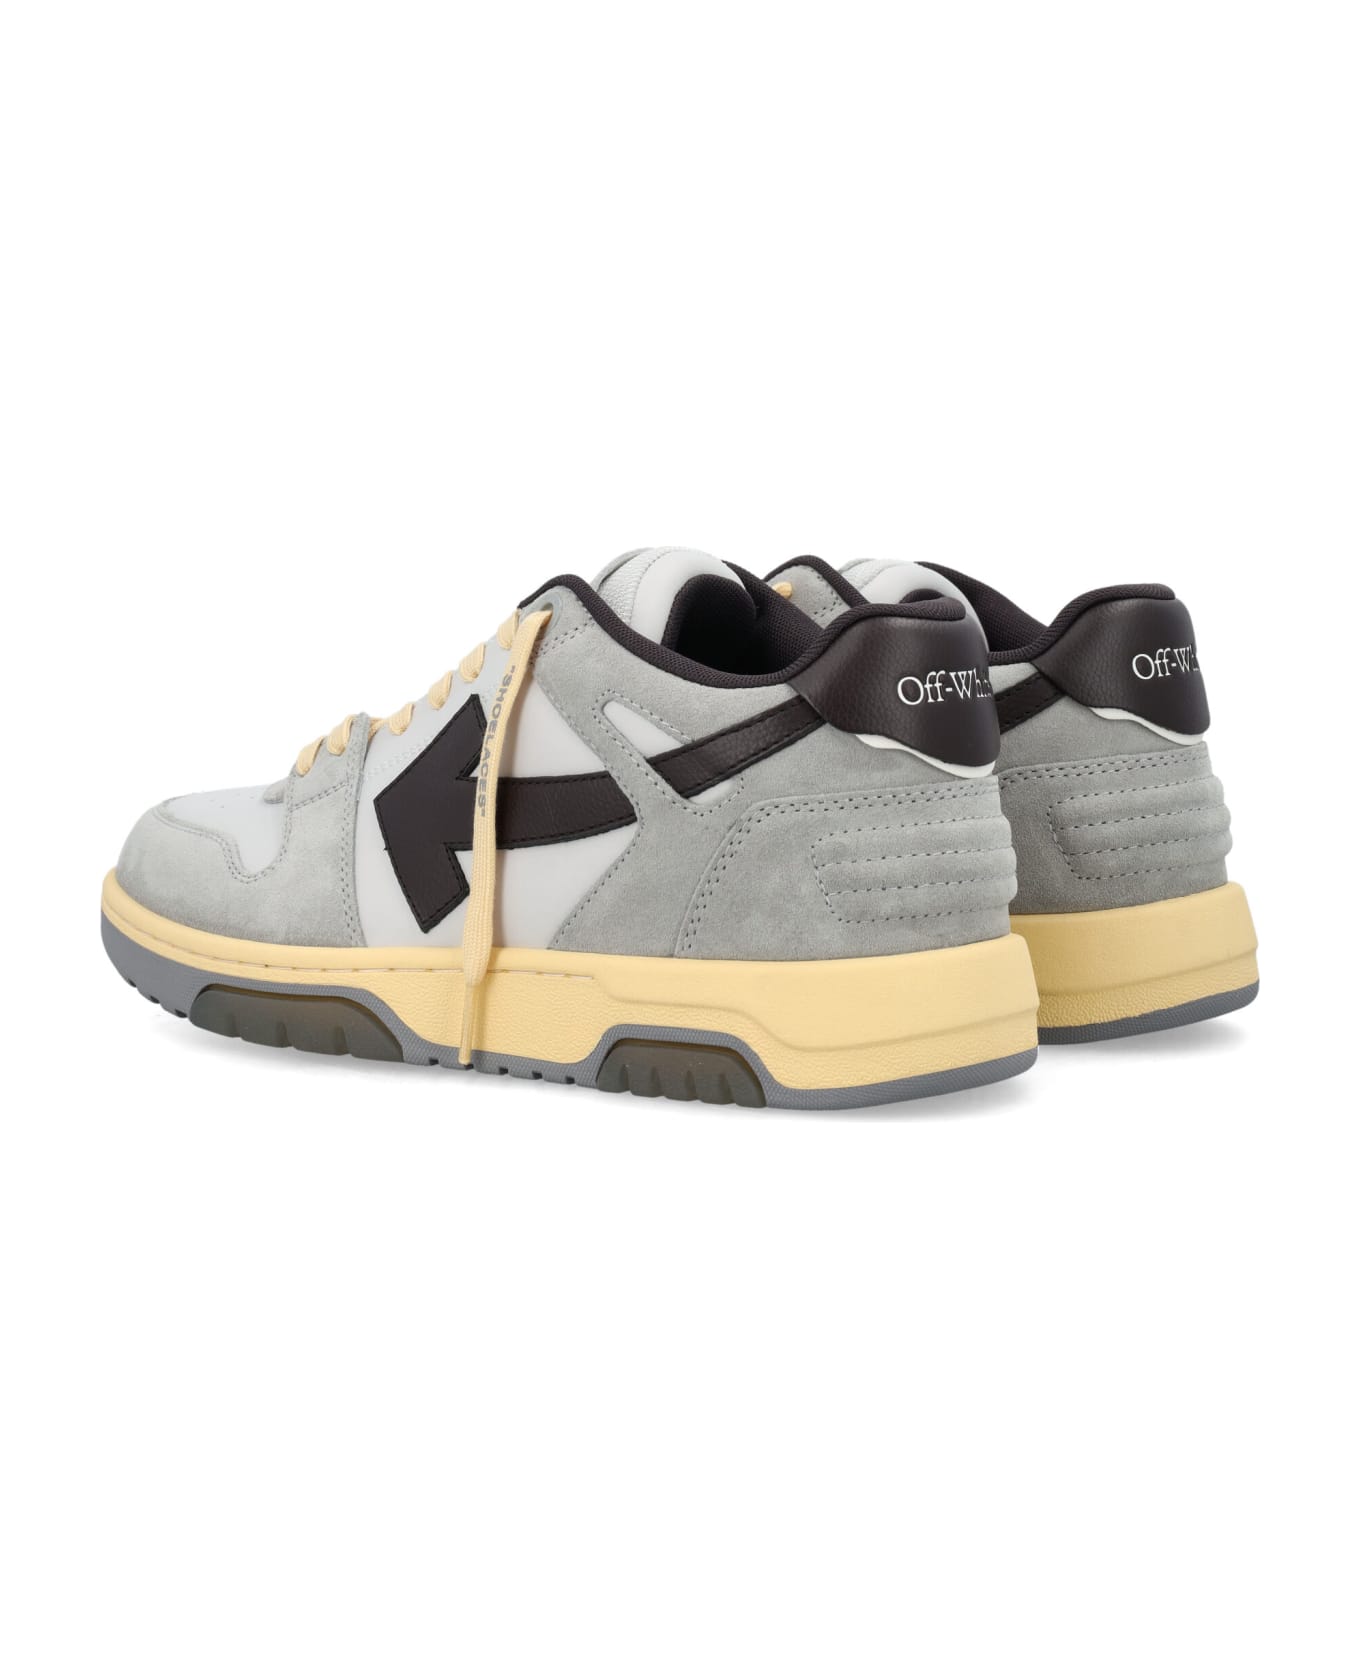 Off-White Out Of Office Sneaker - LIGHT GREY